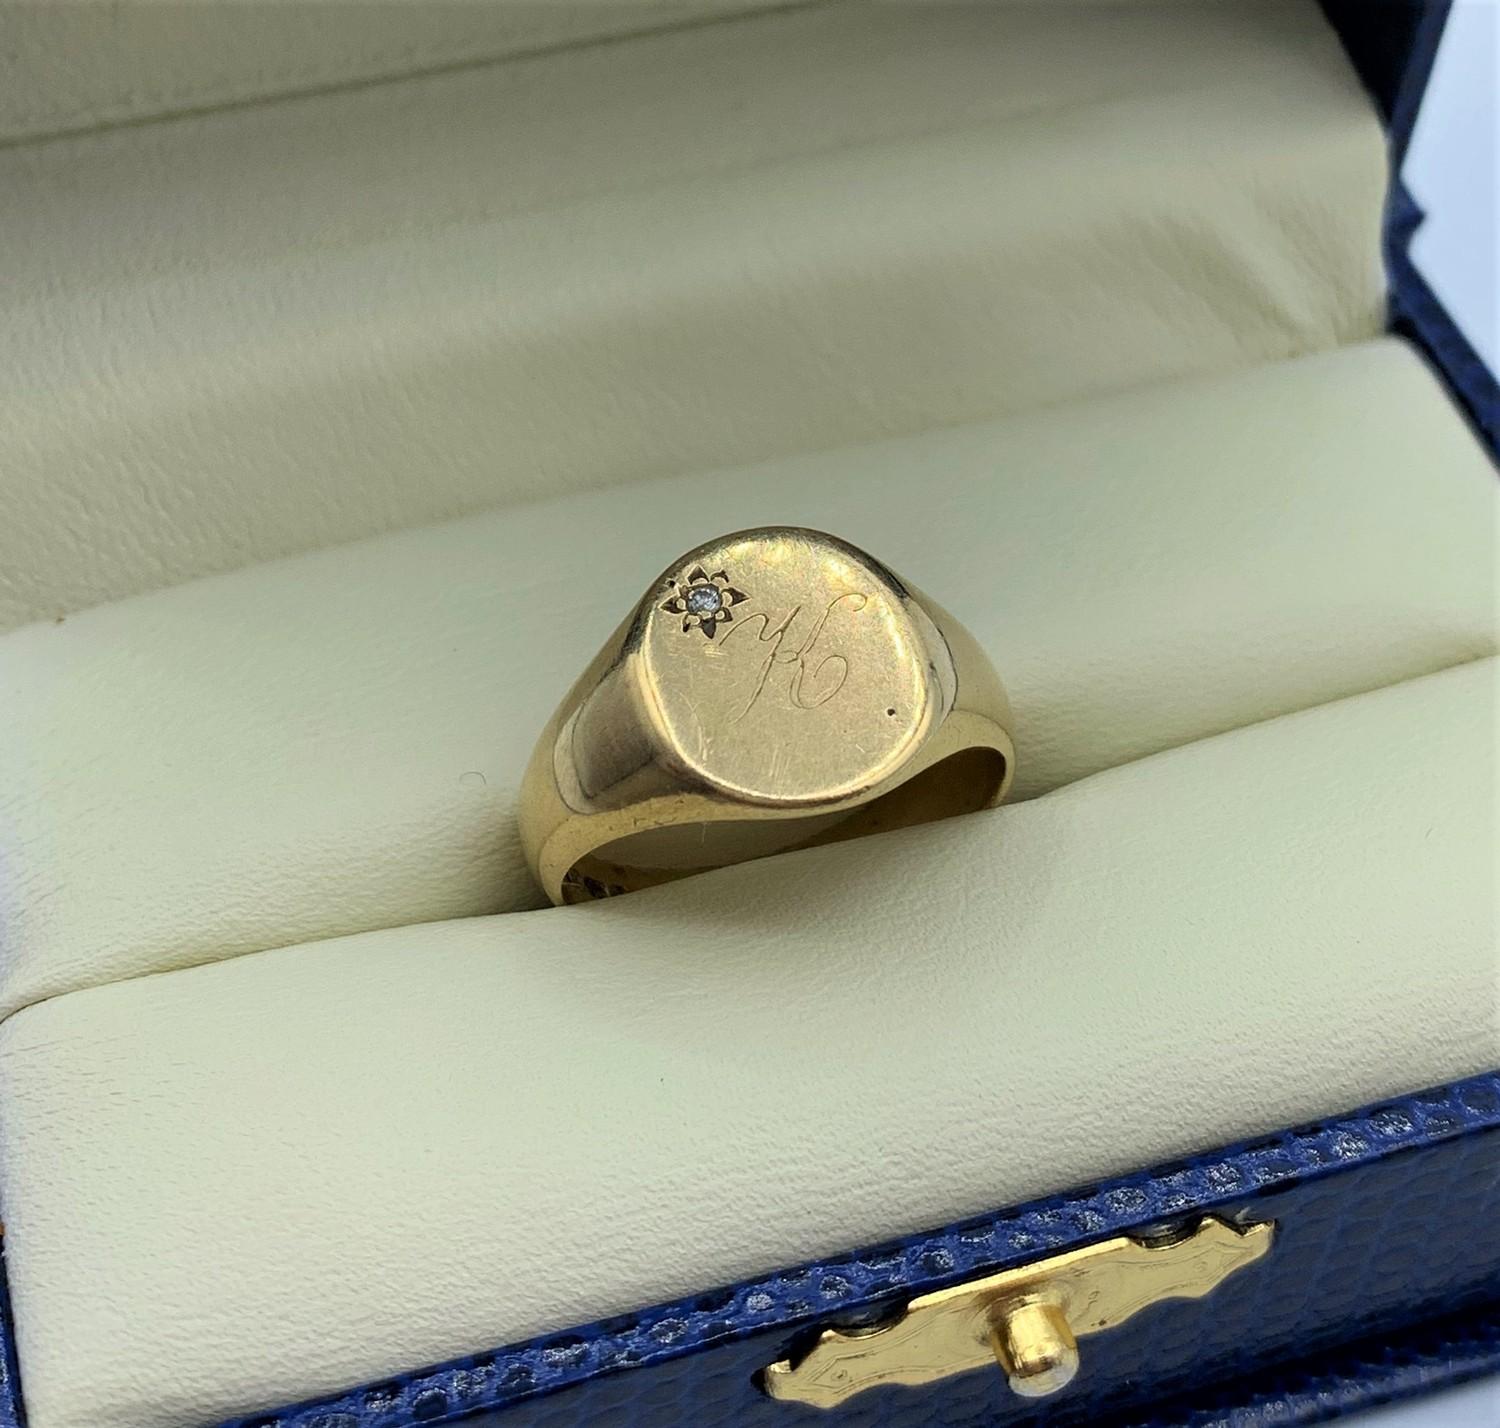 9CT Yellow Gold Signet Ring with Initial K and small Diamond at the corner, size P and weight 4.5g